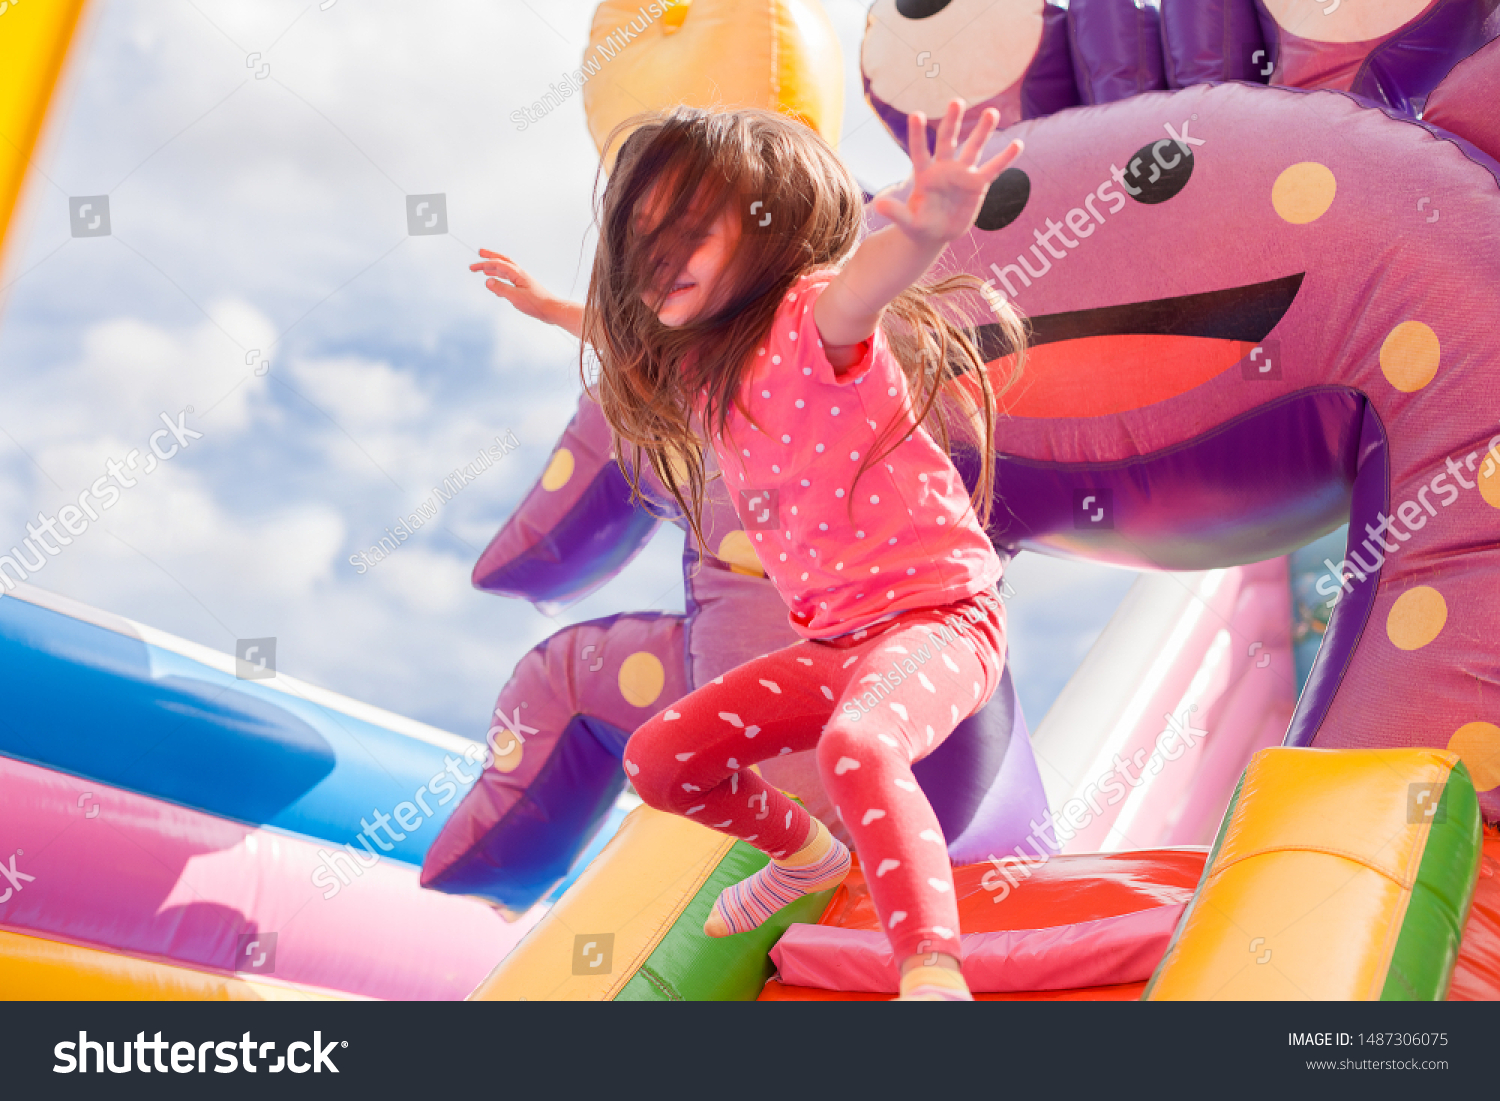 A cheerful child plays in an inflatable castle #1487306075